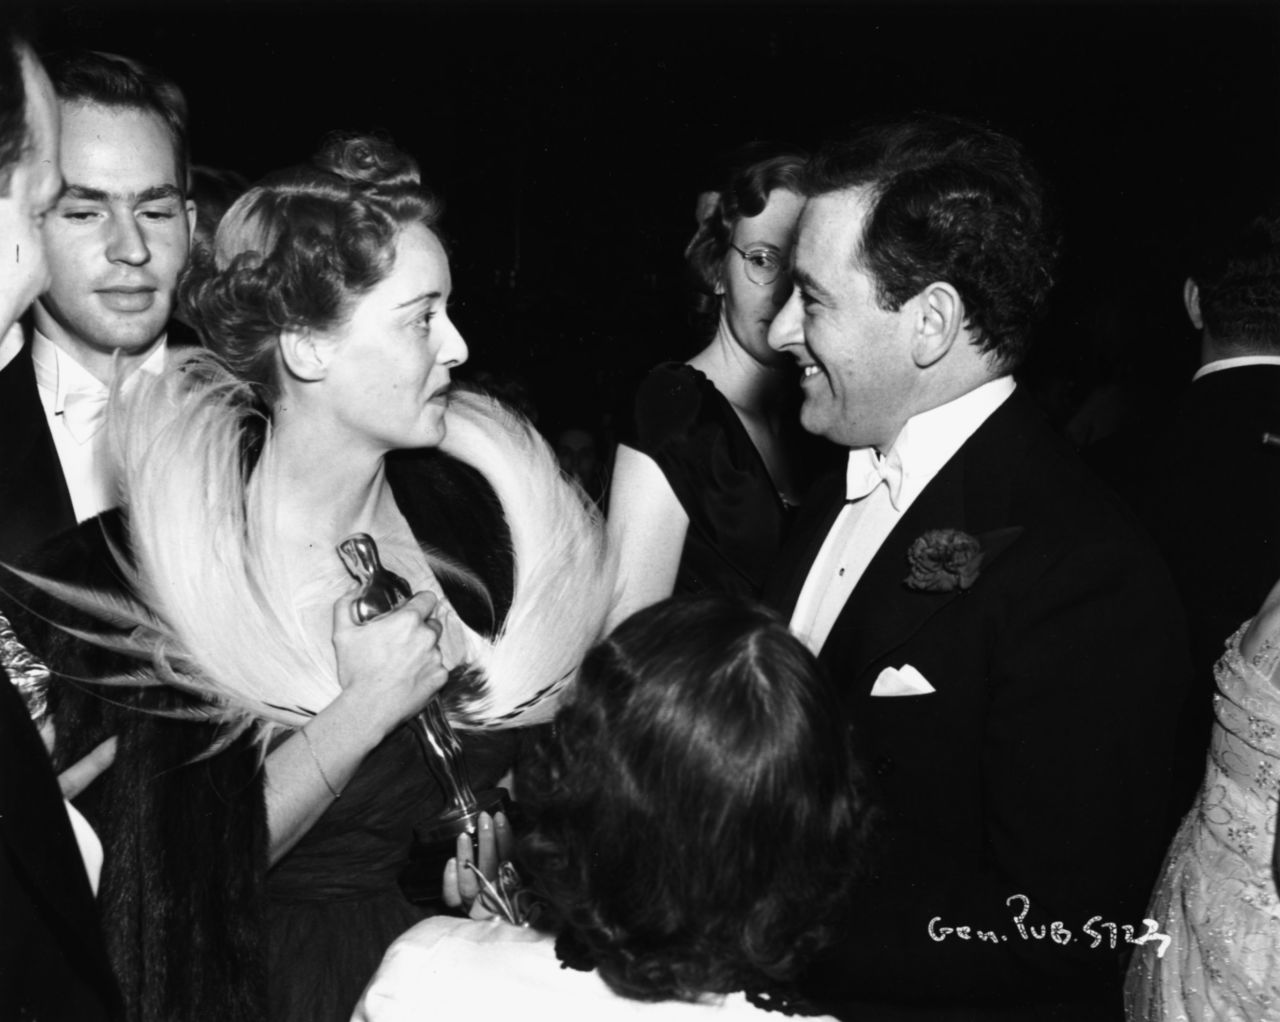 Davis chats with her favorite director, William Wyler, after winning her second Oscar. She took home the prize as a Southern belle in Wyler's "Jezebel" (1938), consolation for losing the role of Scarlett O'Hara in "Gone With the Wind." Wyler also directed her in "The Letter" (1940) and "The Little Foxes" (1941). "I would have jumped into the Hudson River if this man had told me to, directorially speaking," Davis said in her 1962 autobiography, "The Lonely Life."